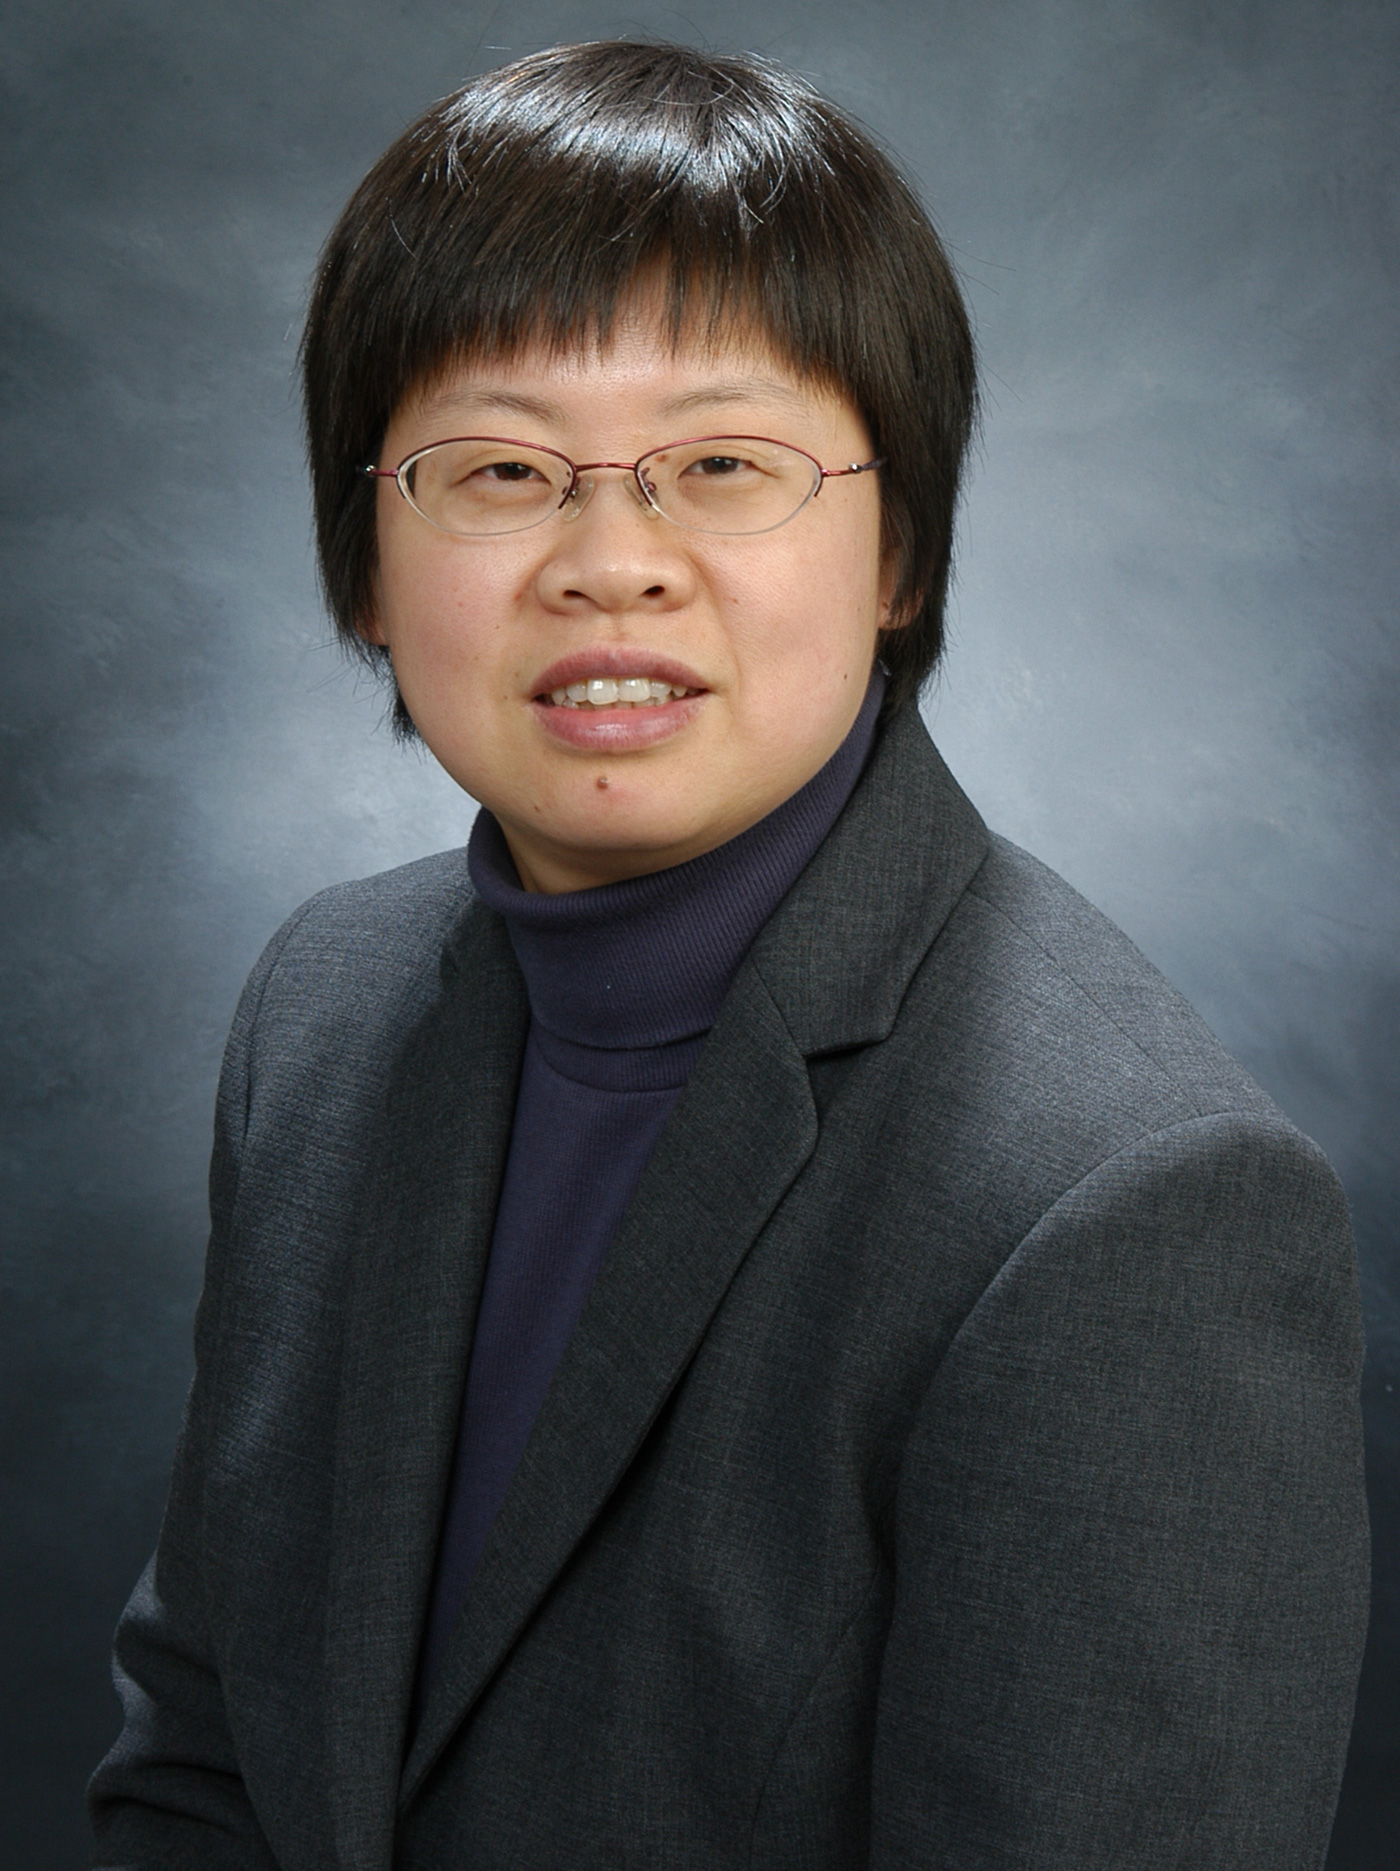 Yao Chen is a Professor  in the Manning School of Business'  Operations and Information Systems Department at UMass Lowell.